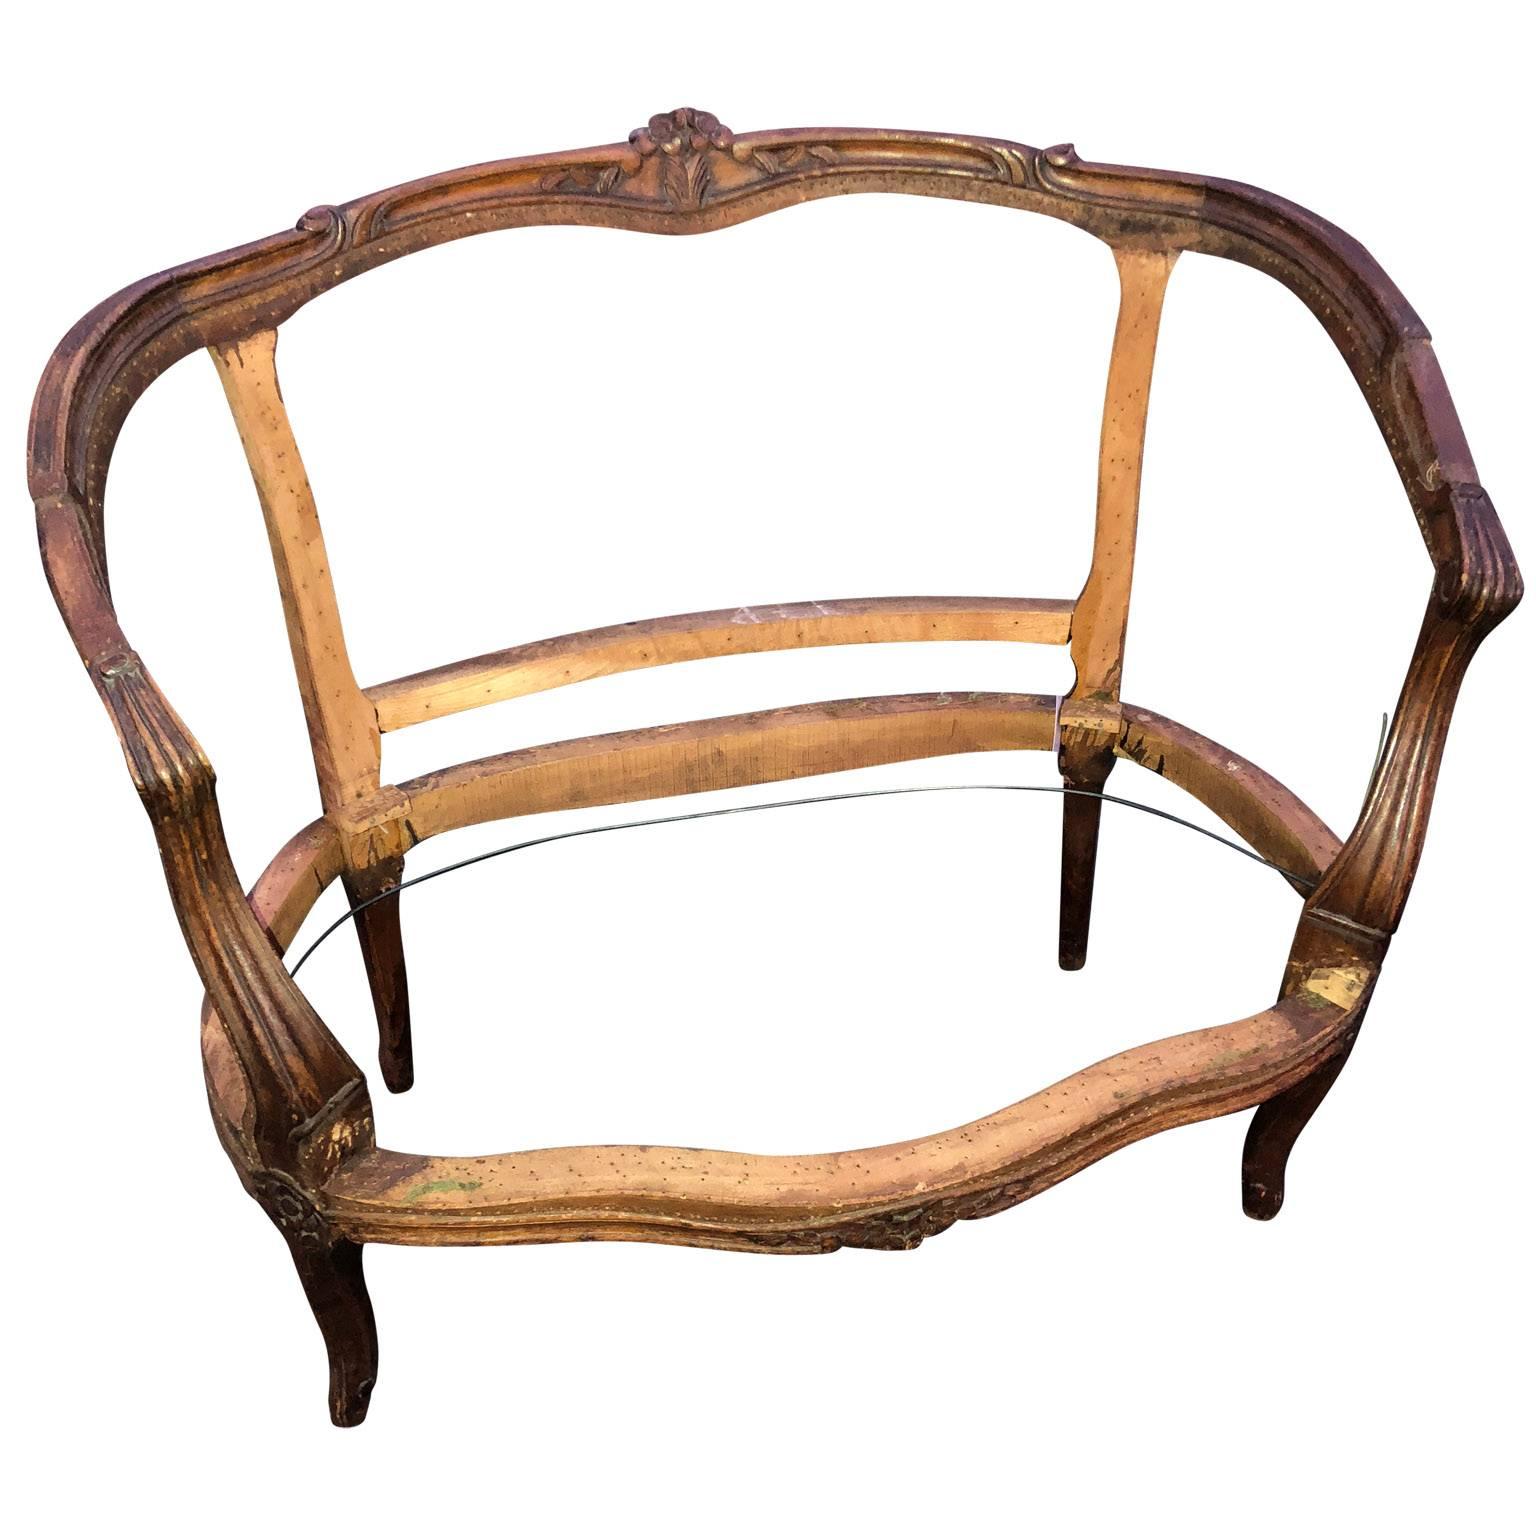 Hand-Carved French Rococo Two-Seat Settee Arm Chair Frame